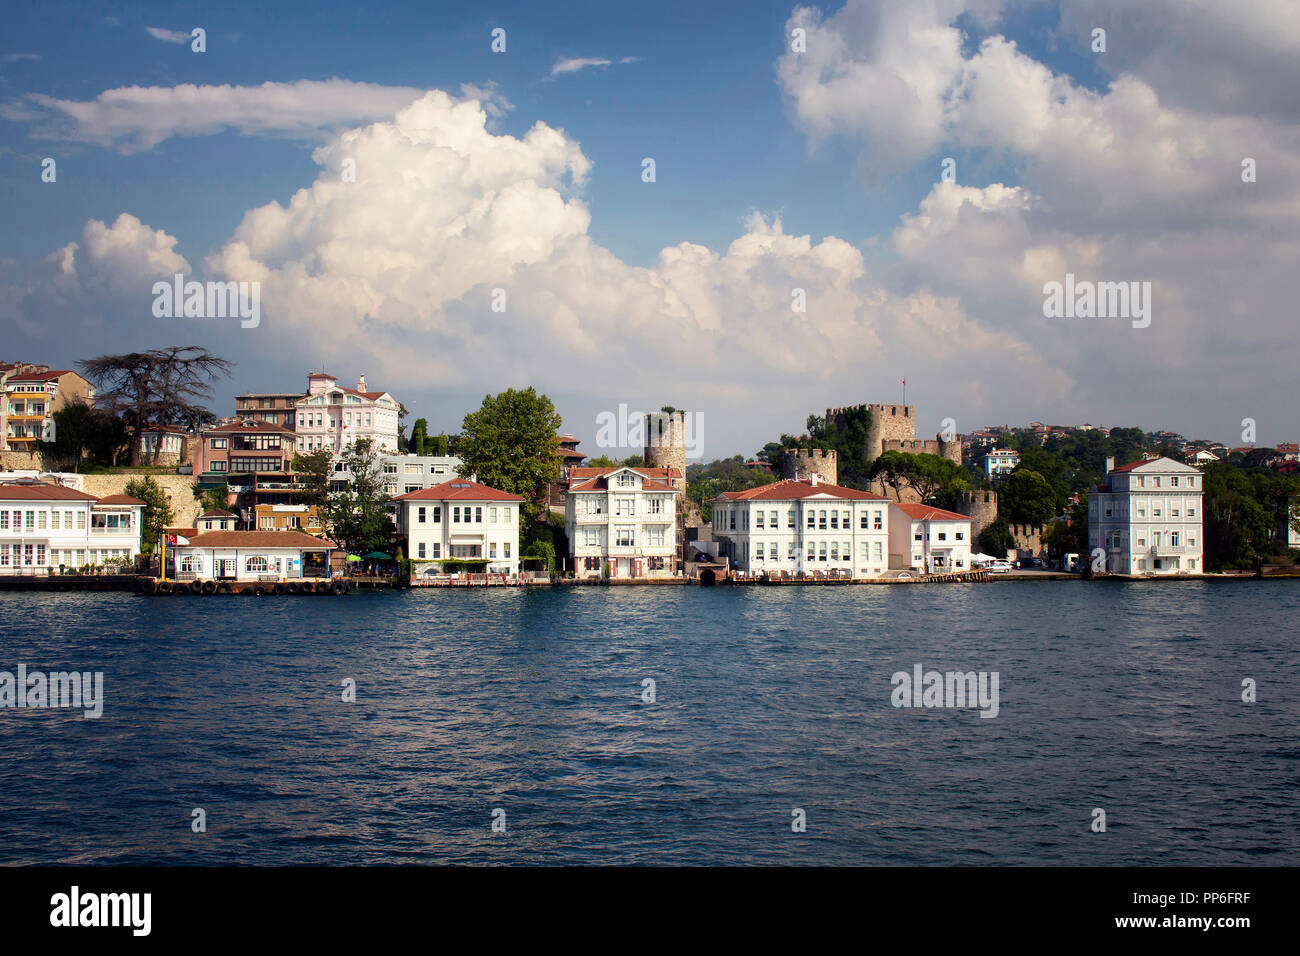 View of historical, old Turkish / Ottoman houses and a castle by Bosphorus on Asian side of Istanbul. It is a sunny / cloudy summer day. Stock Photo